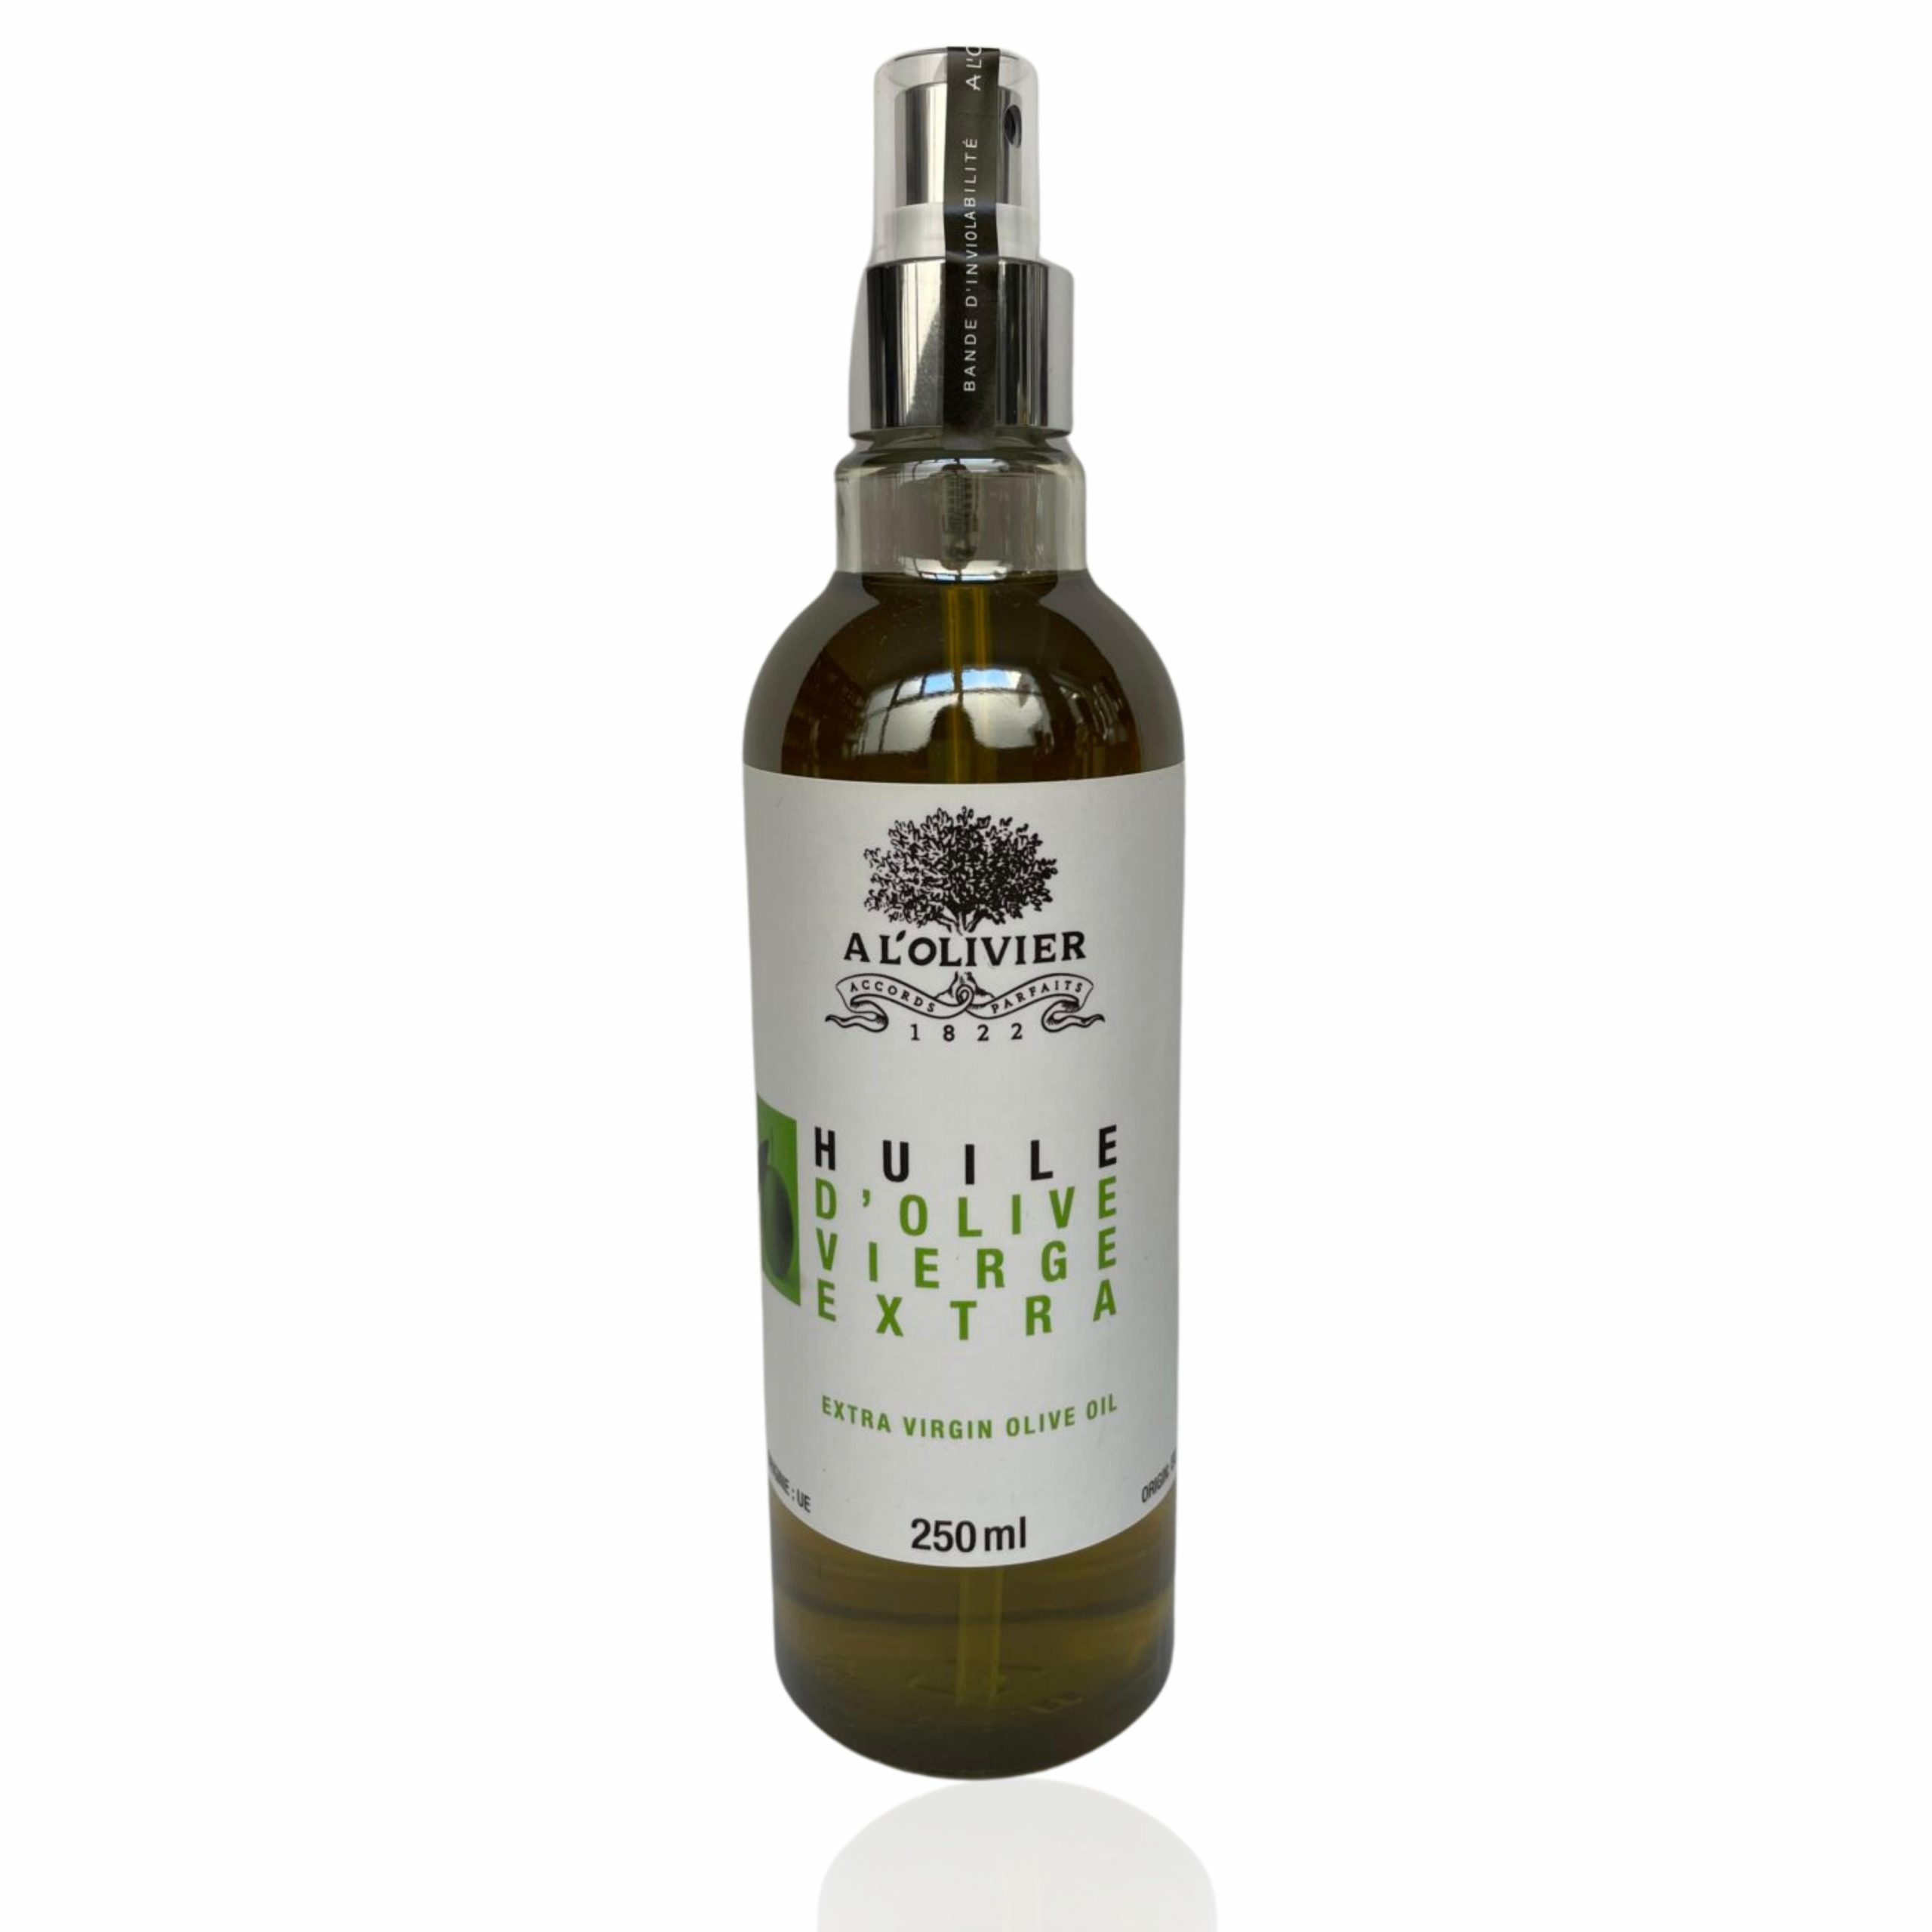 Huile d'olive vierge extra en spray